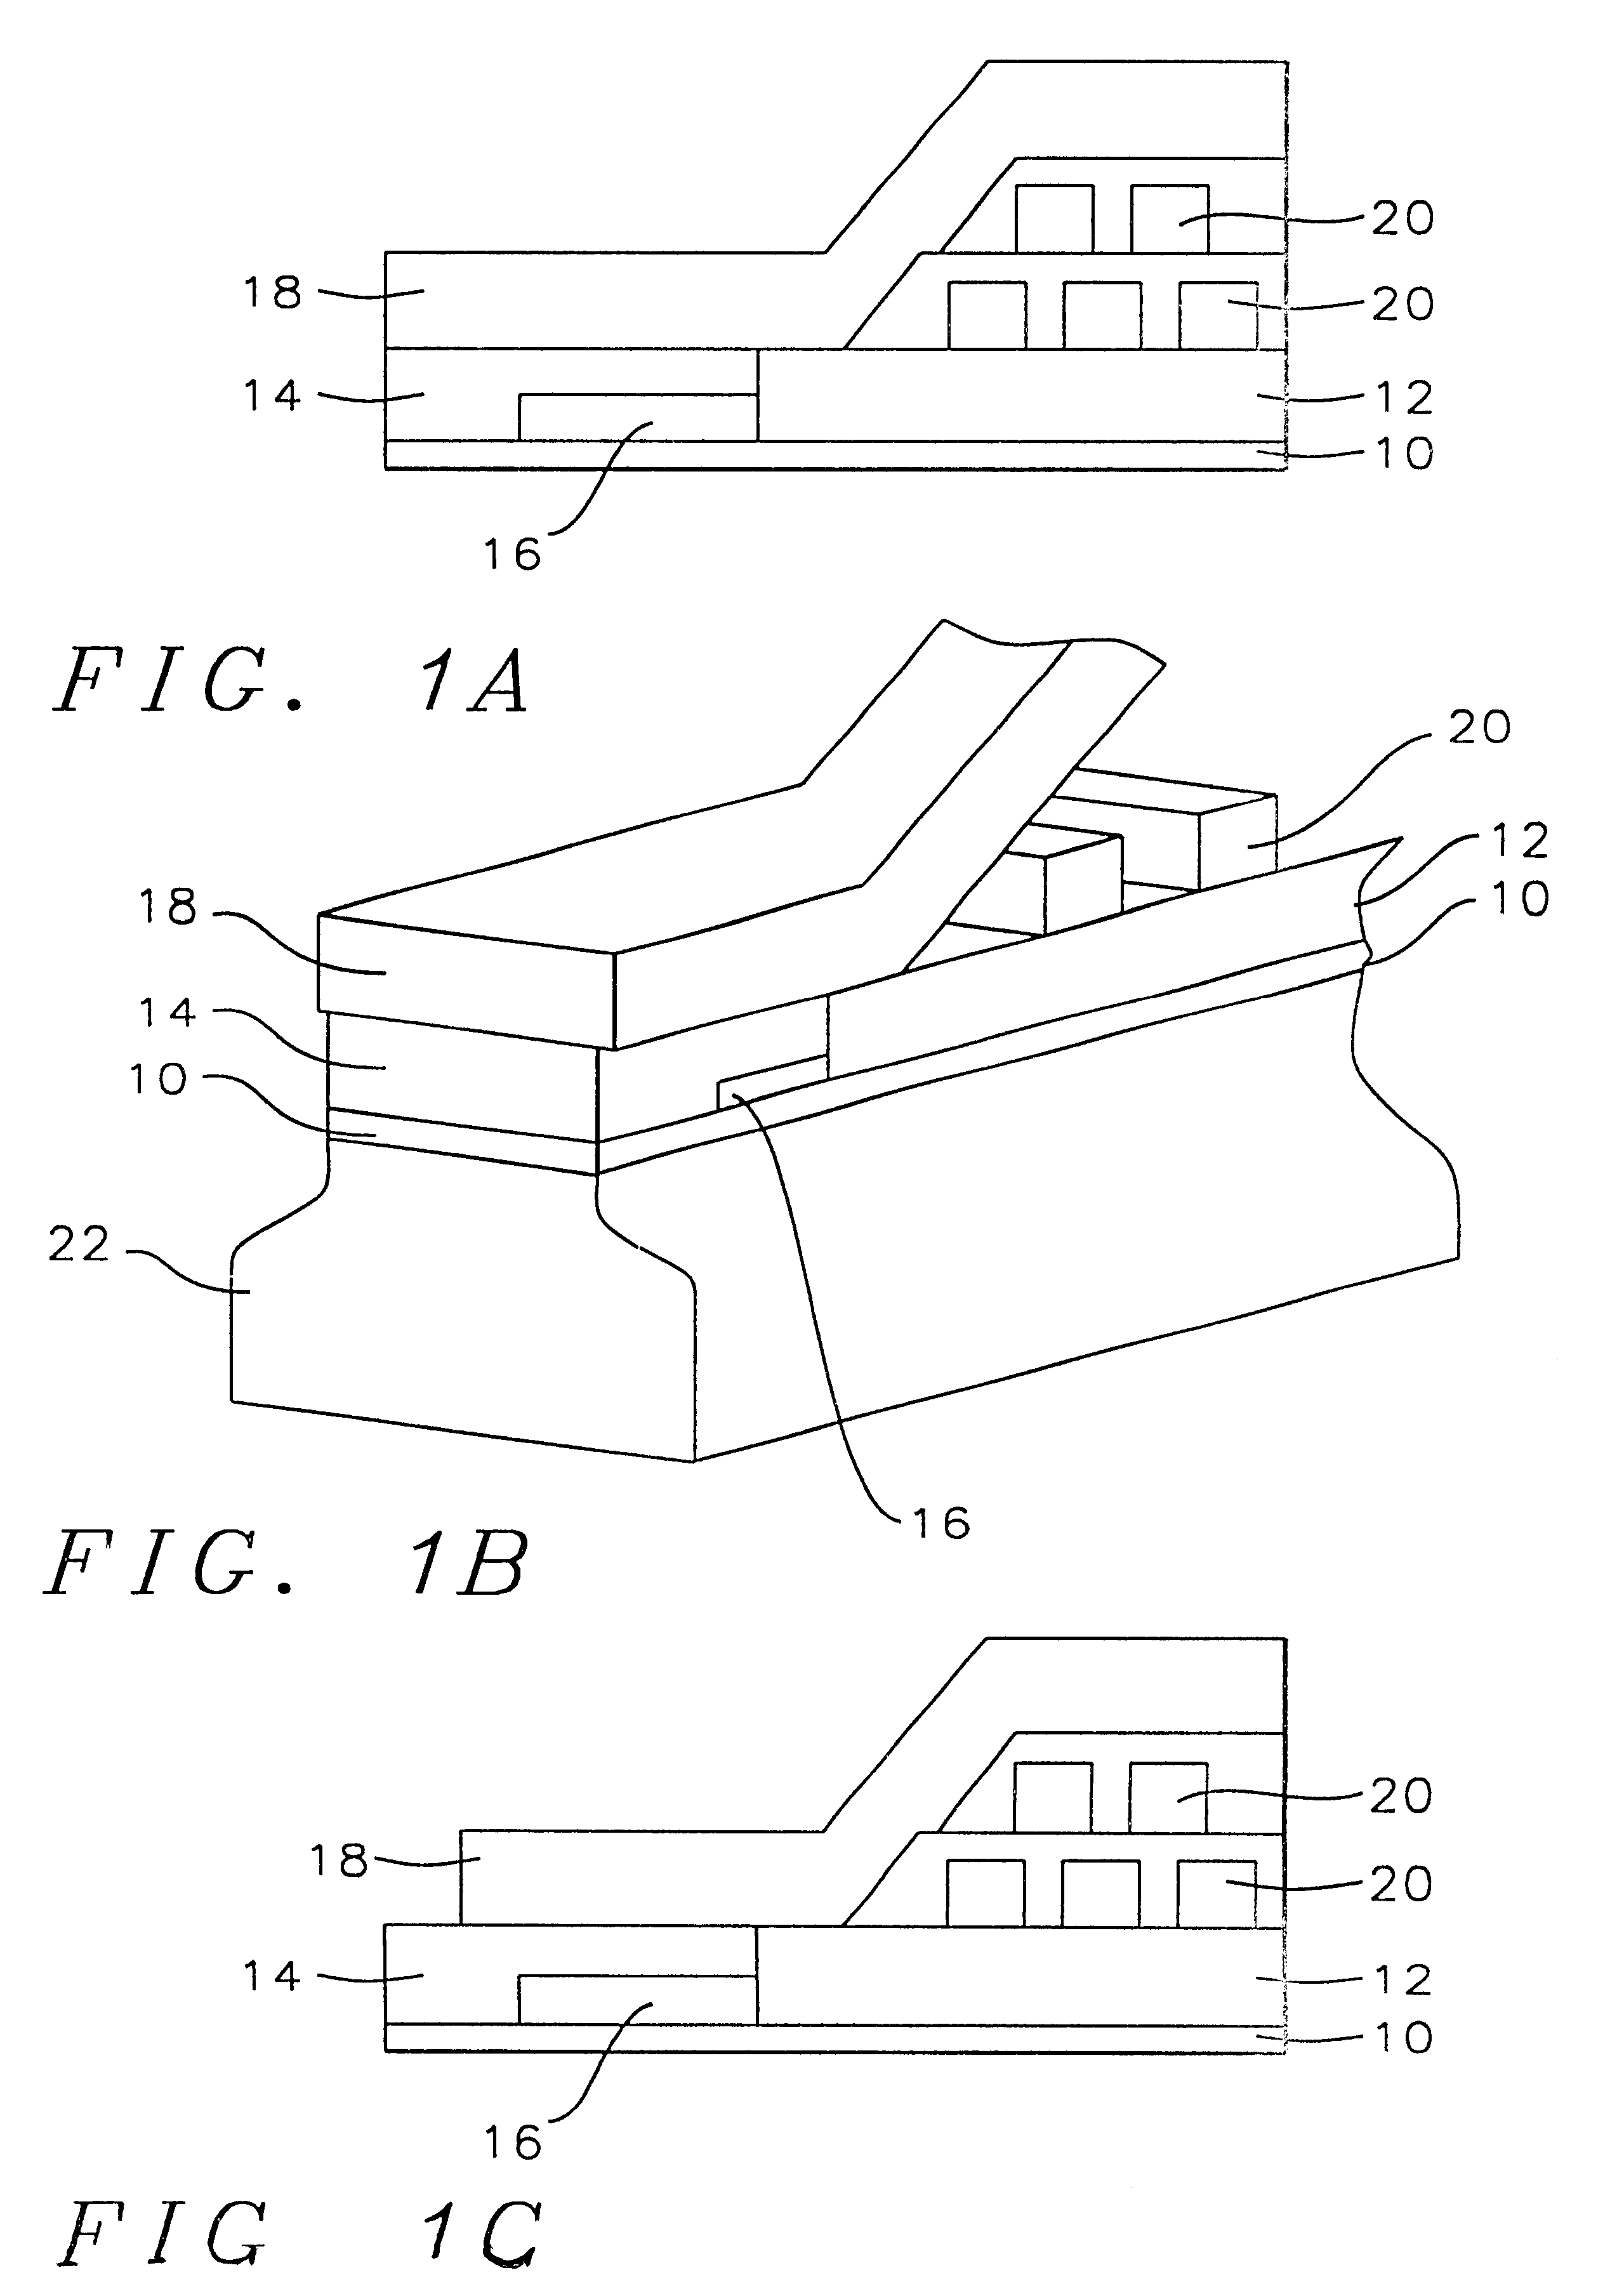 Method to make a stitched writer for a giant magneto-resistive head